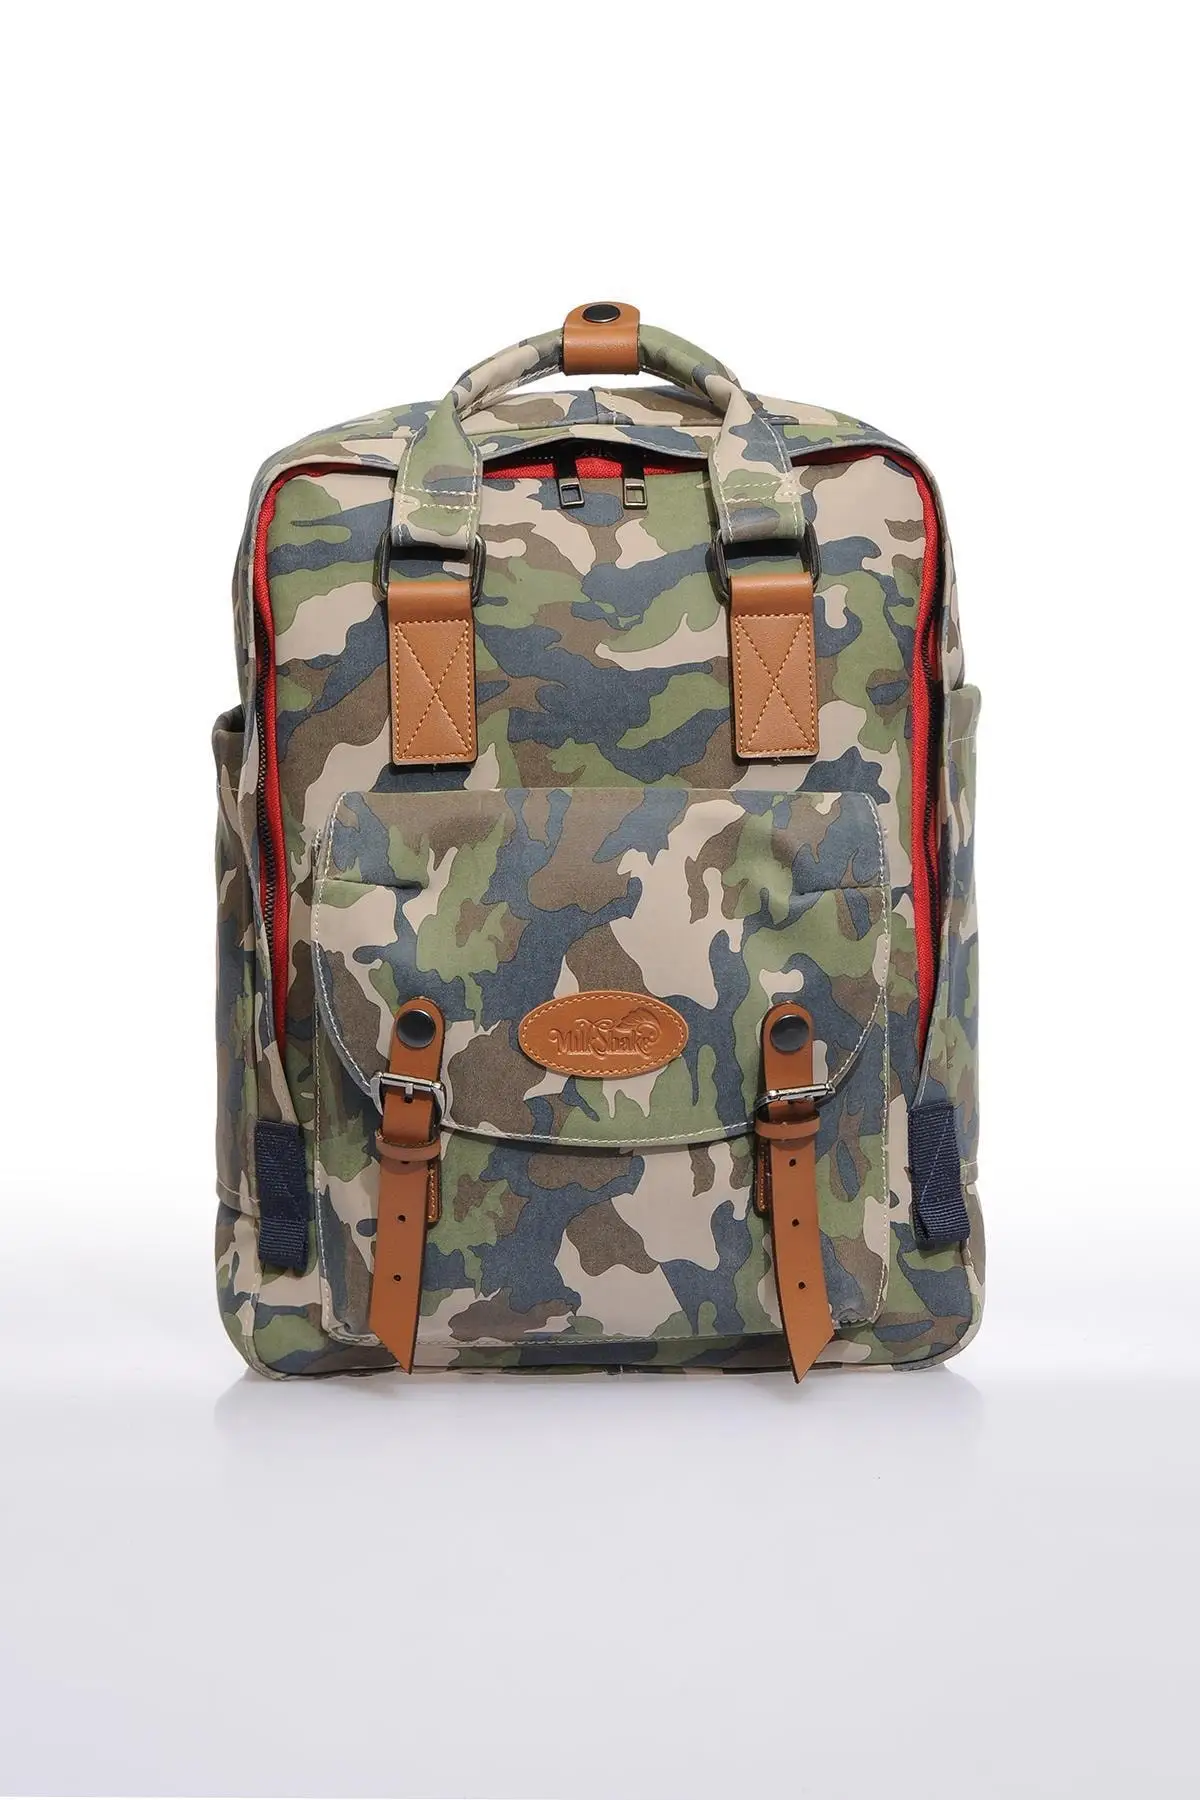 New Product High Quality Waterproof Men's Women's Camouflage Backpack 2022 Trend Made in Turkey School Bag Travel Bag Green